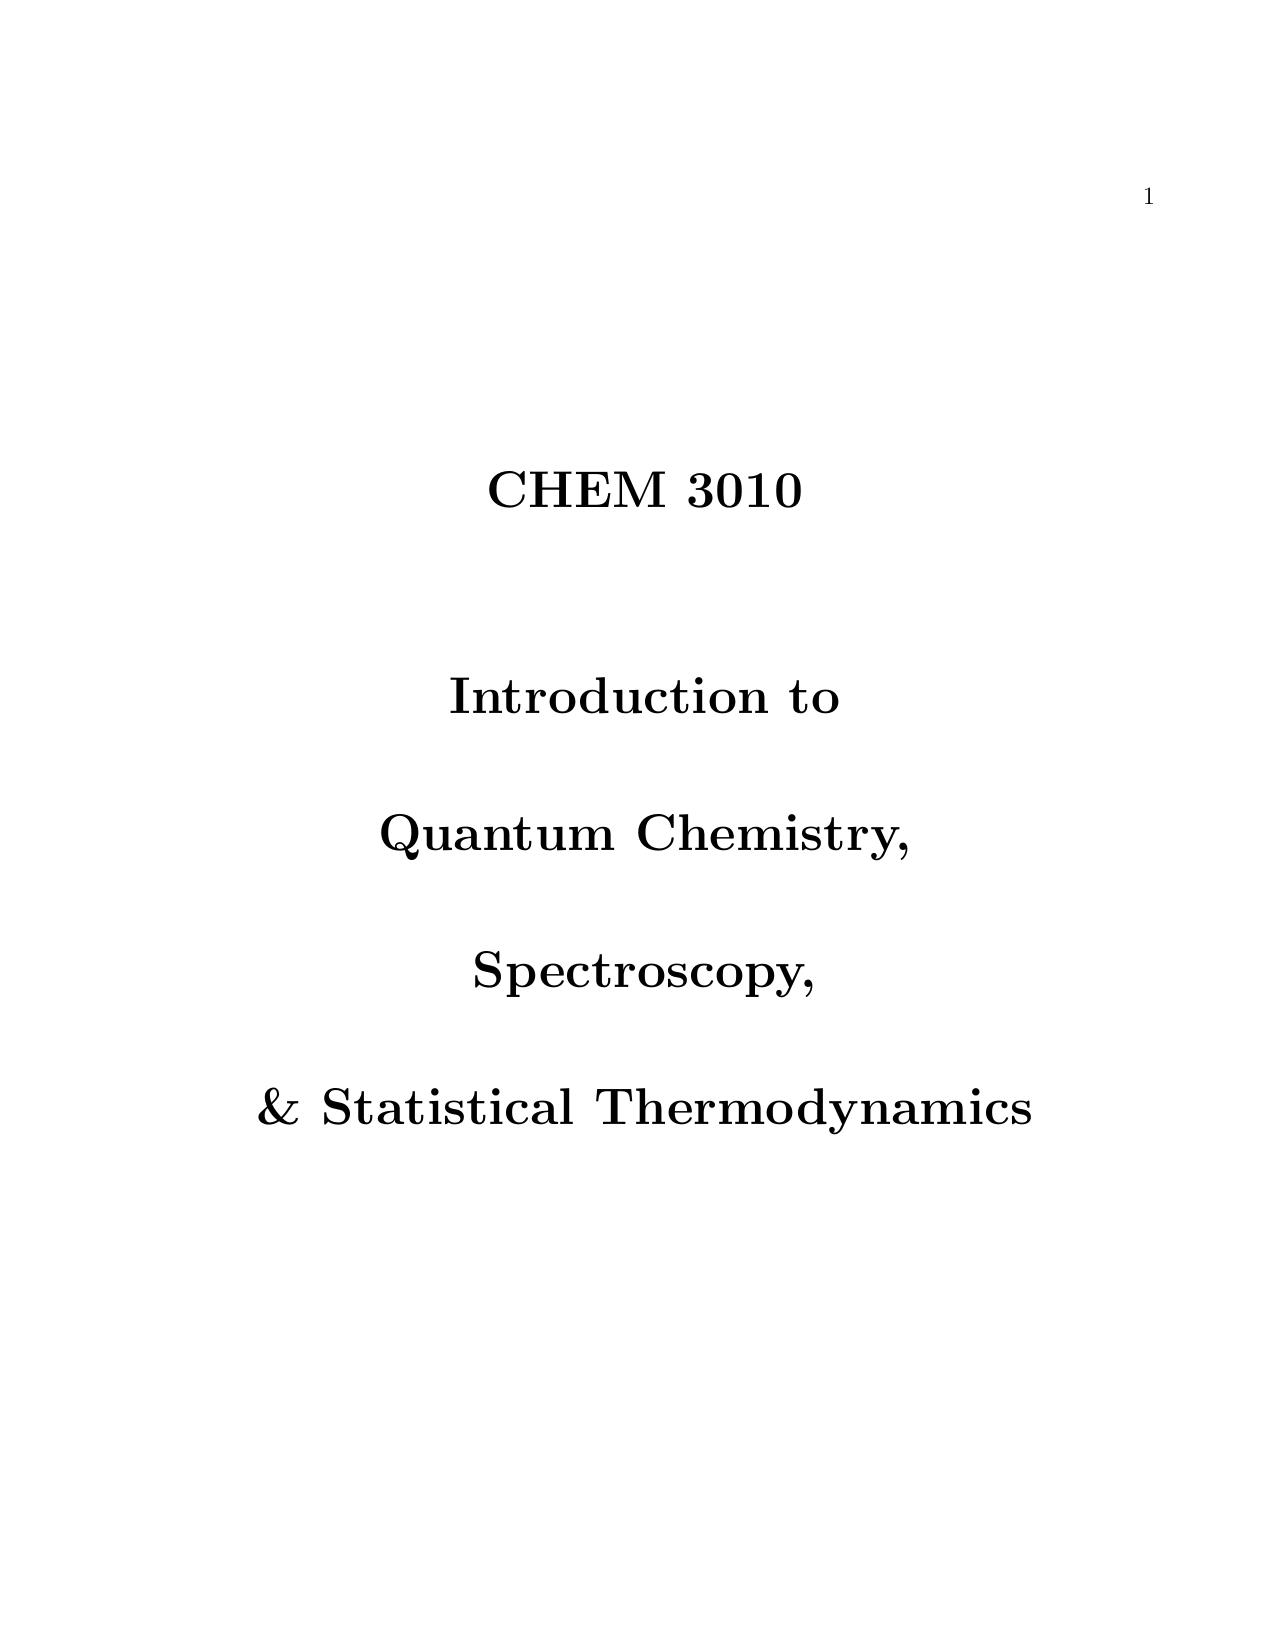 Introduction to Quantum Chemistry, Spectroscopy, & Statistical Thermodynamics 2013